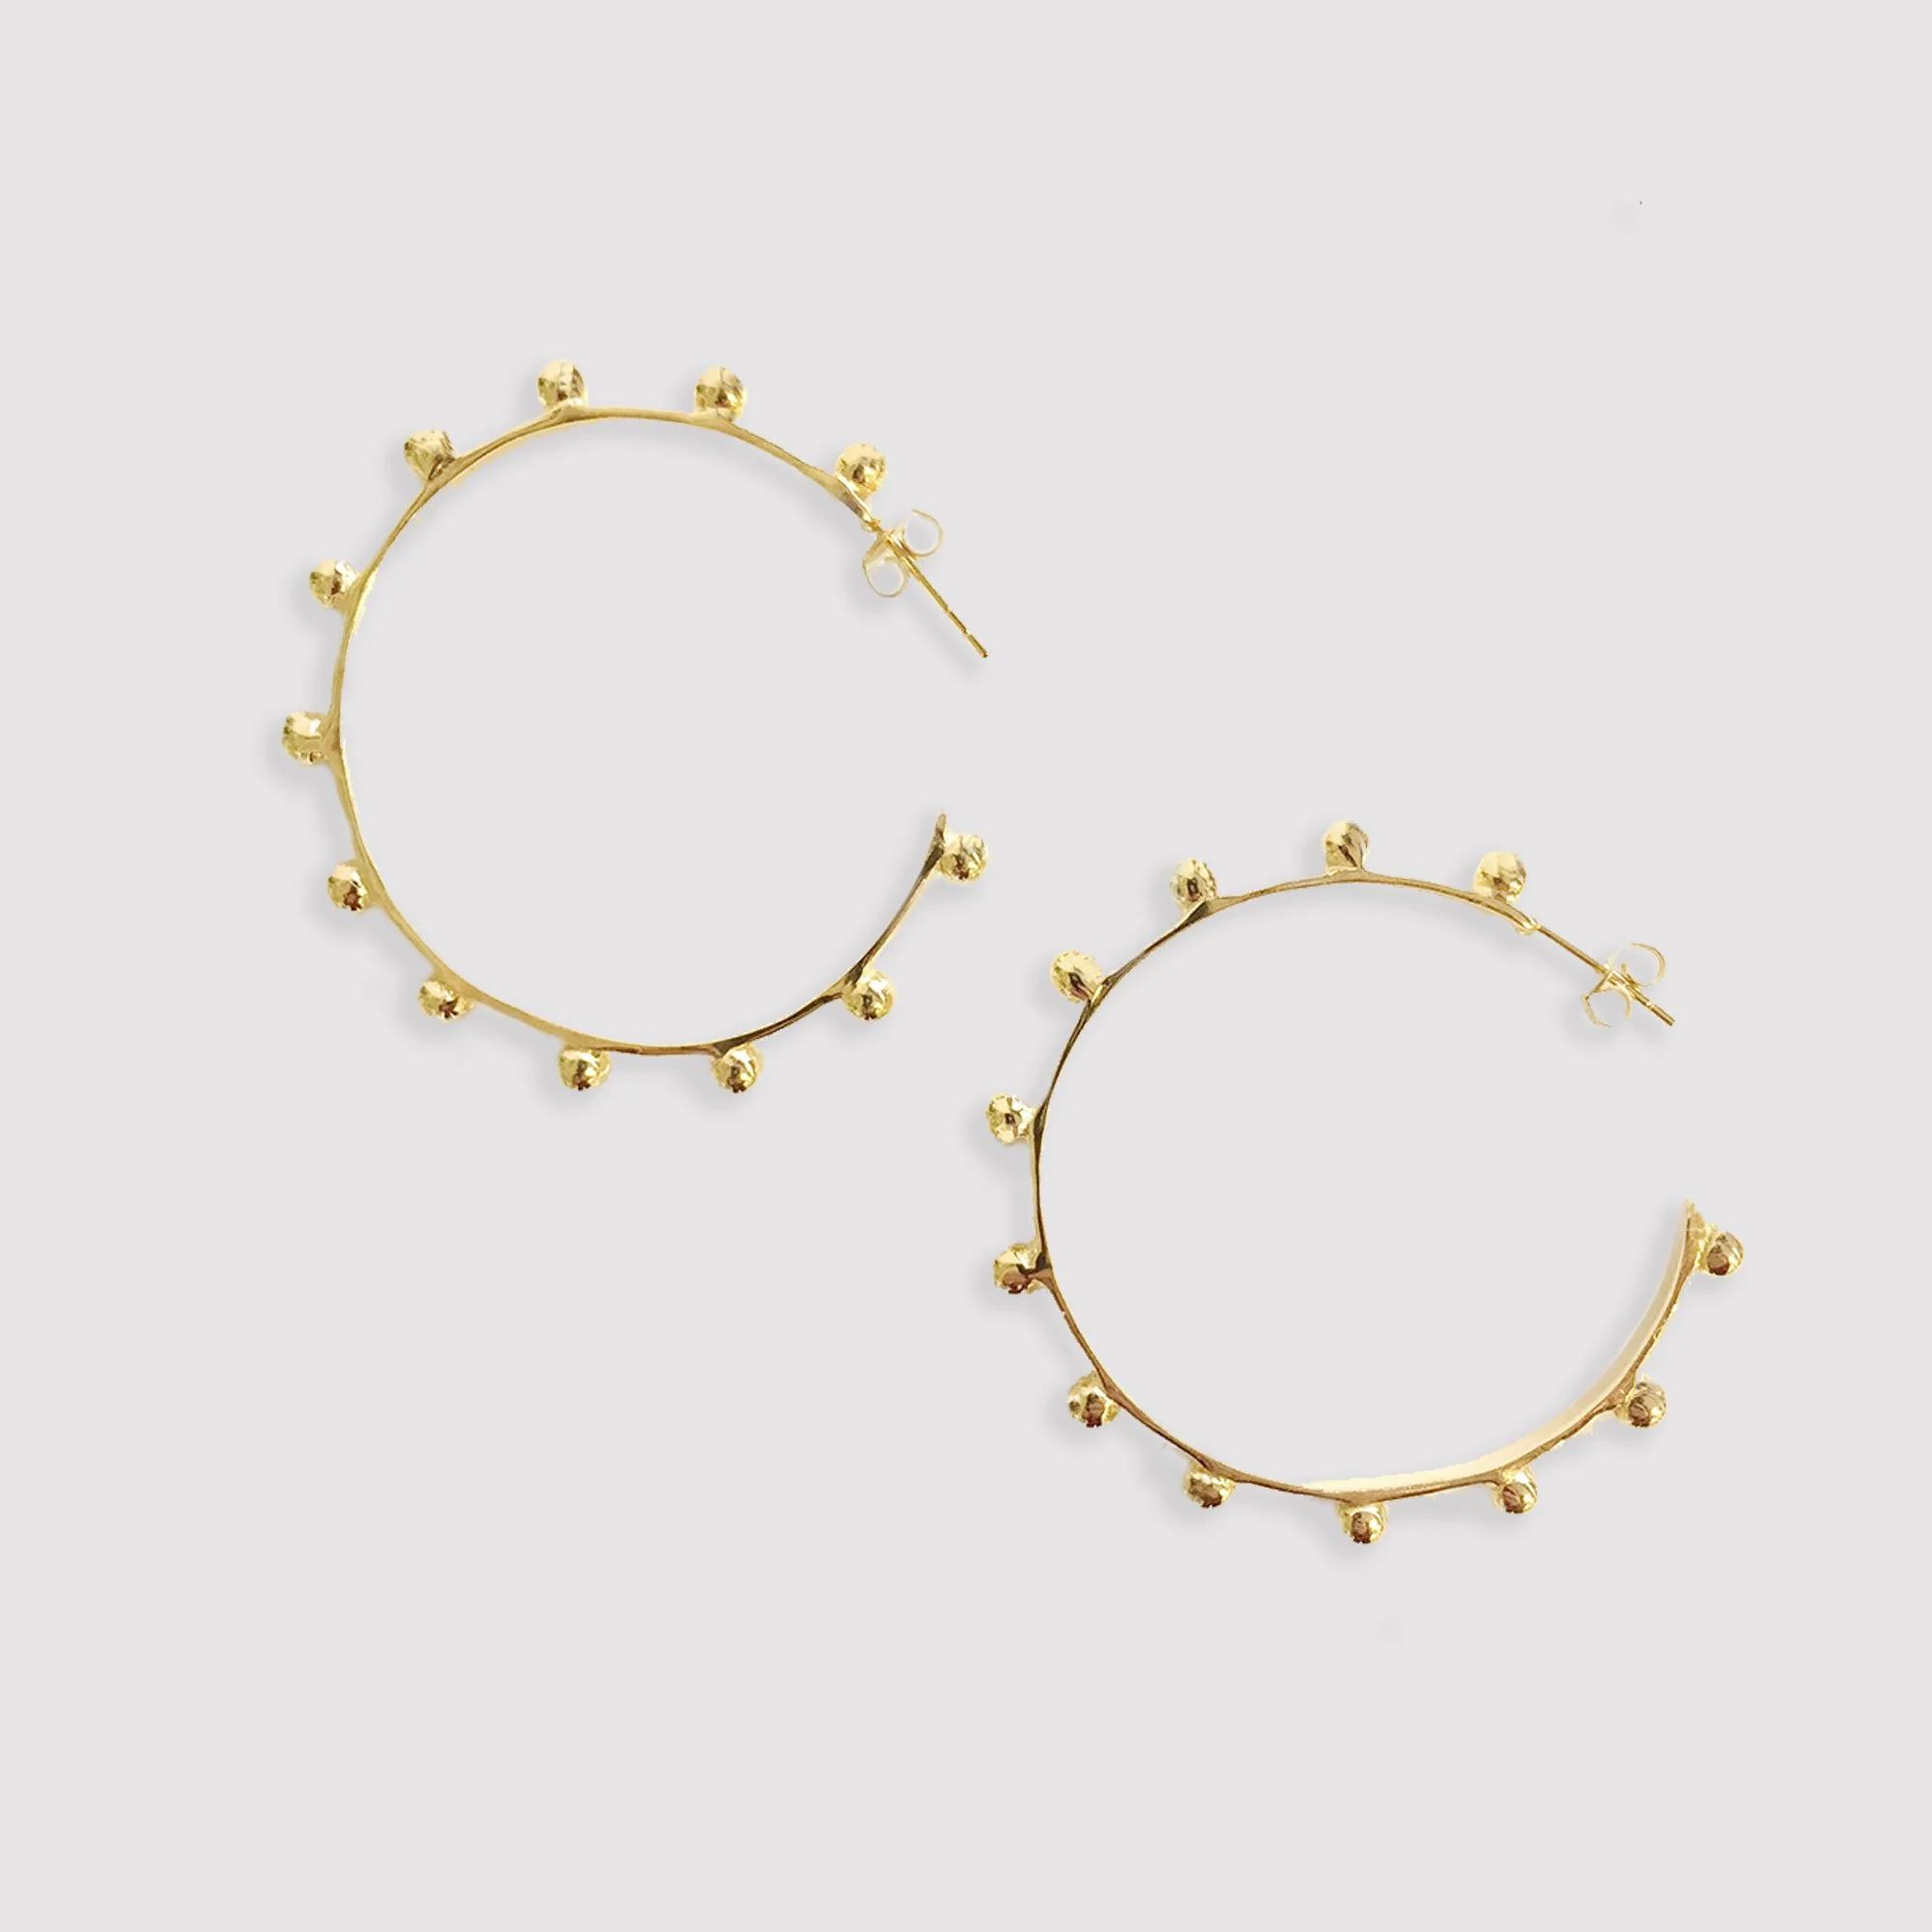 Carter Hoops Large | Addison Weeks Jewelry